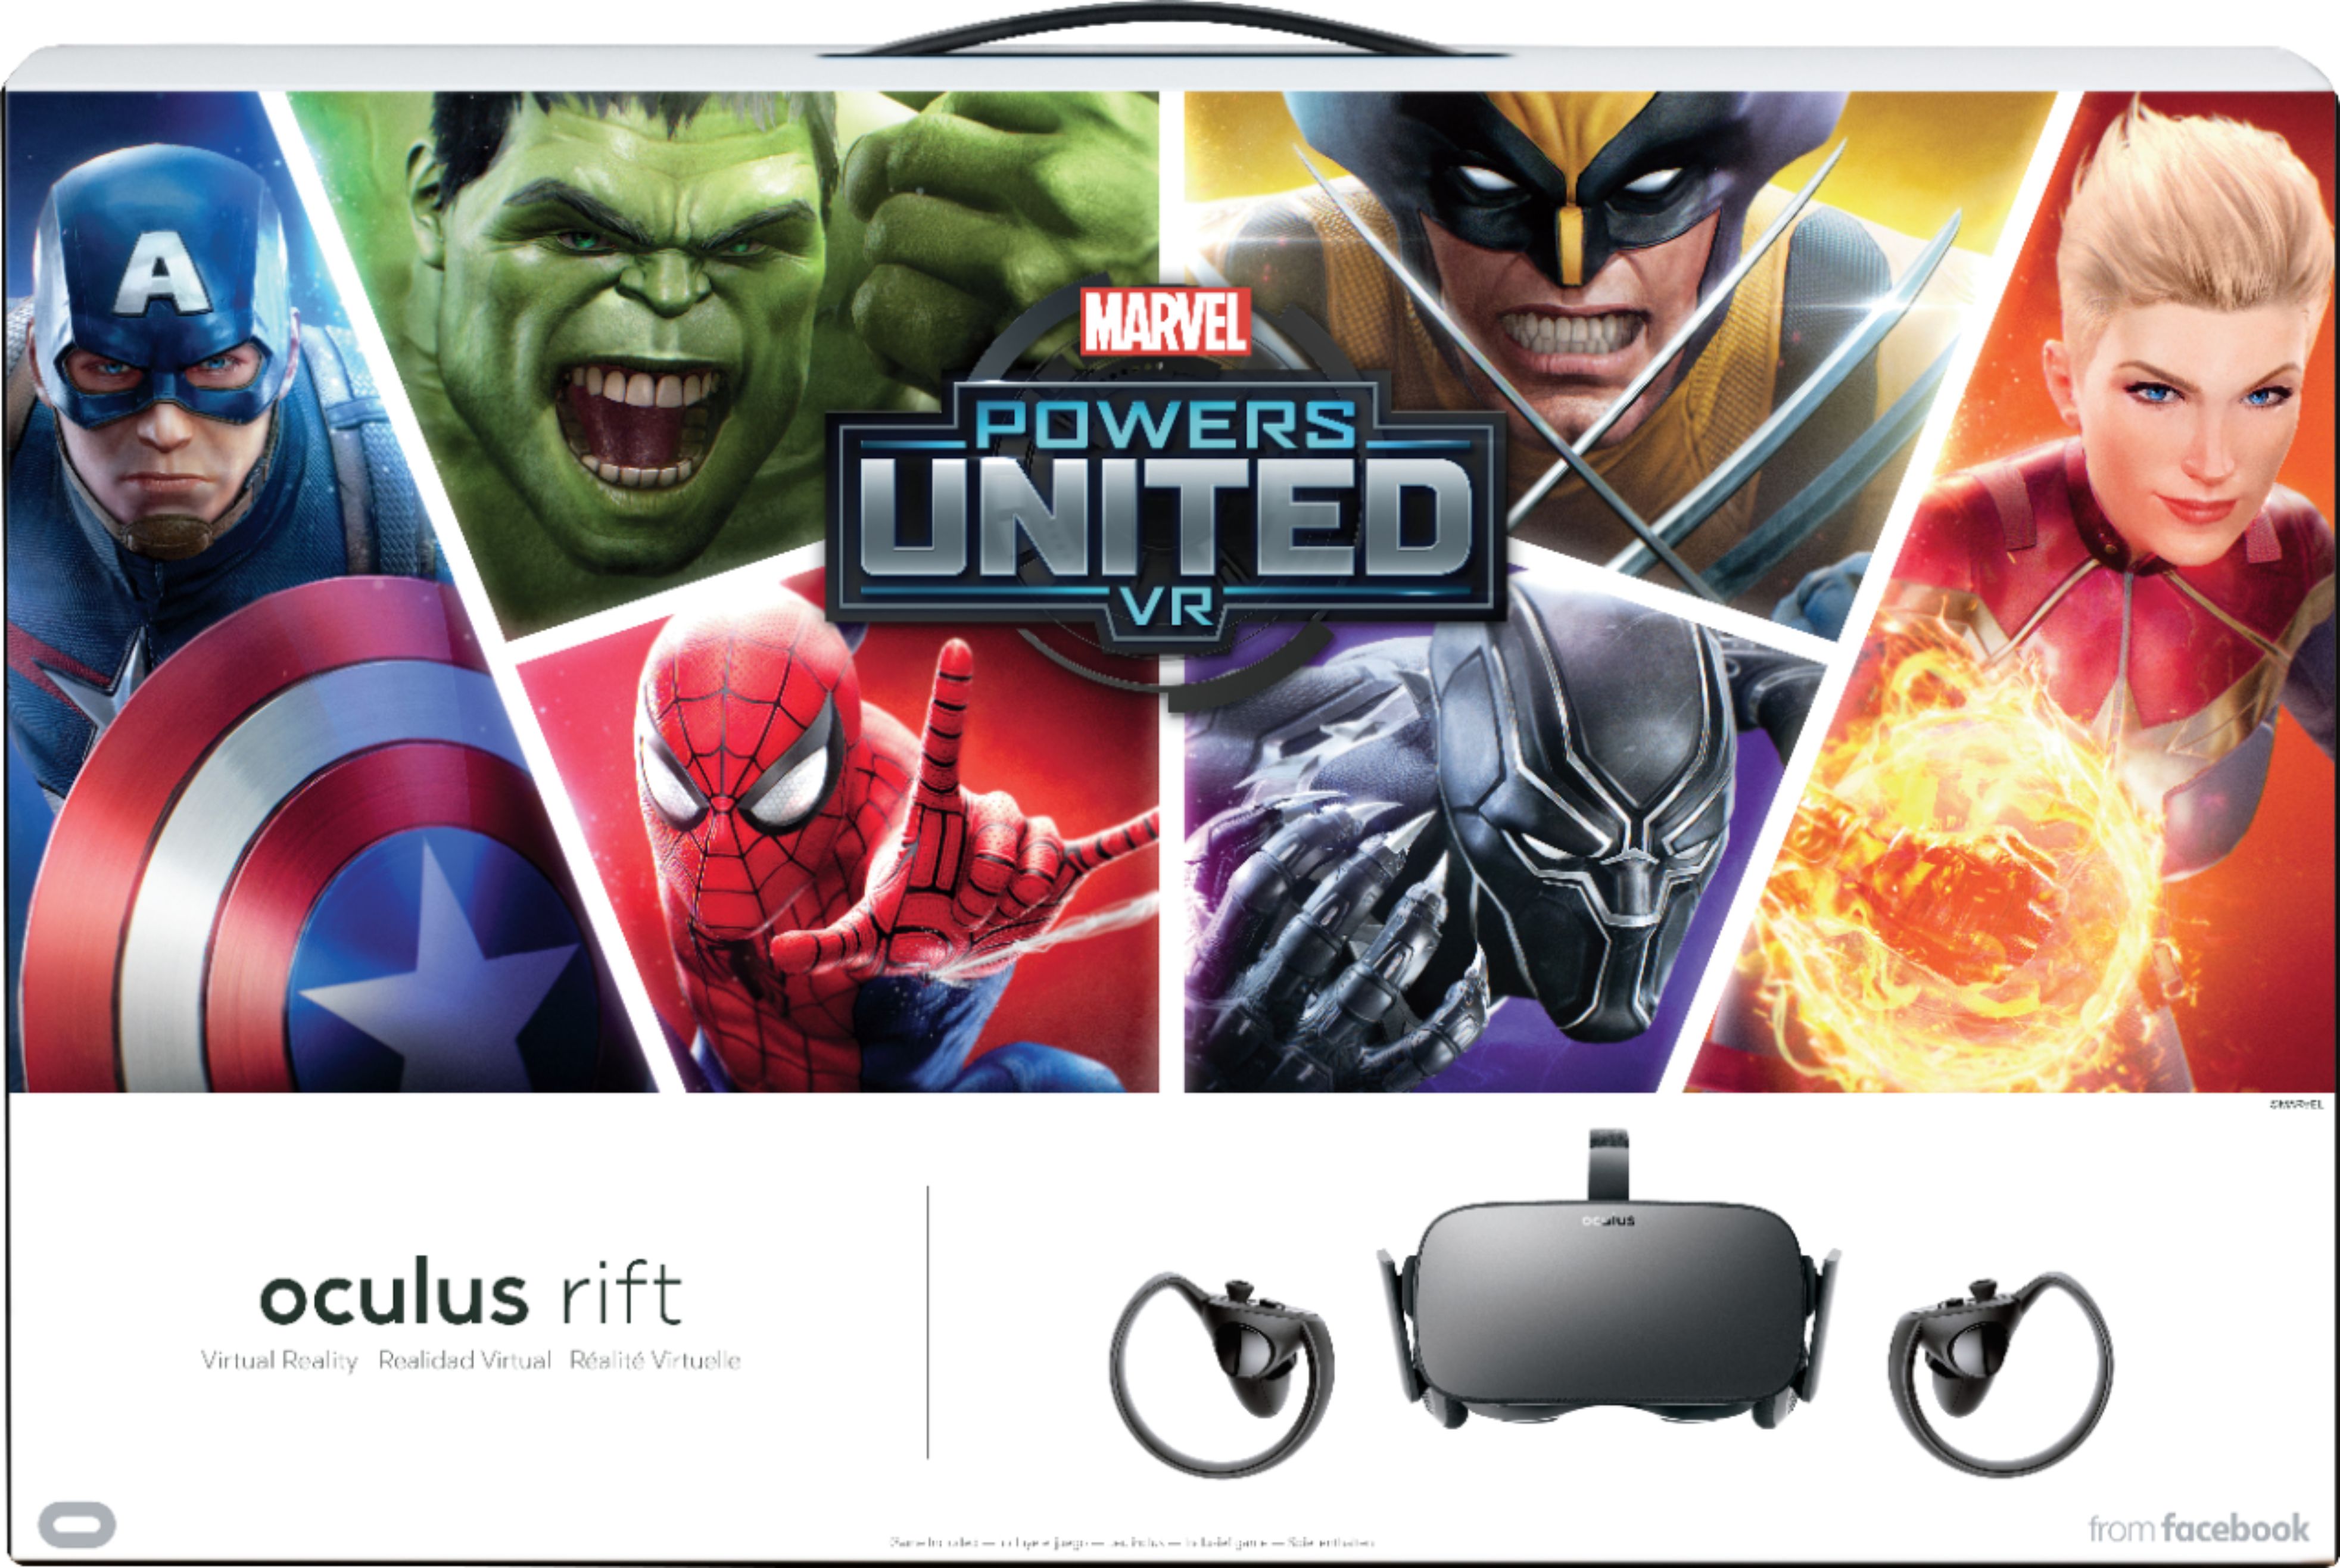 marvel powers united vr review